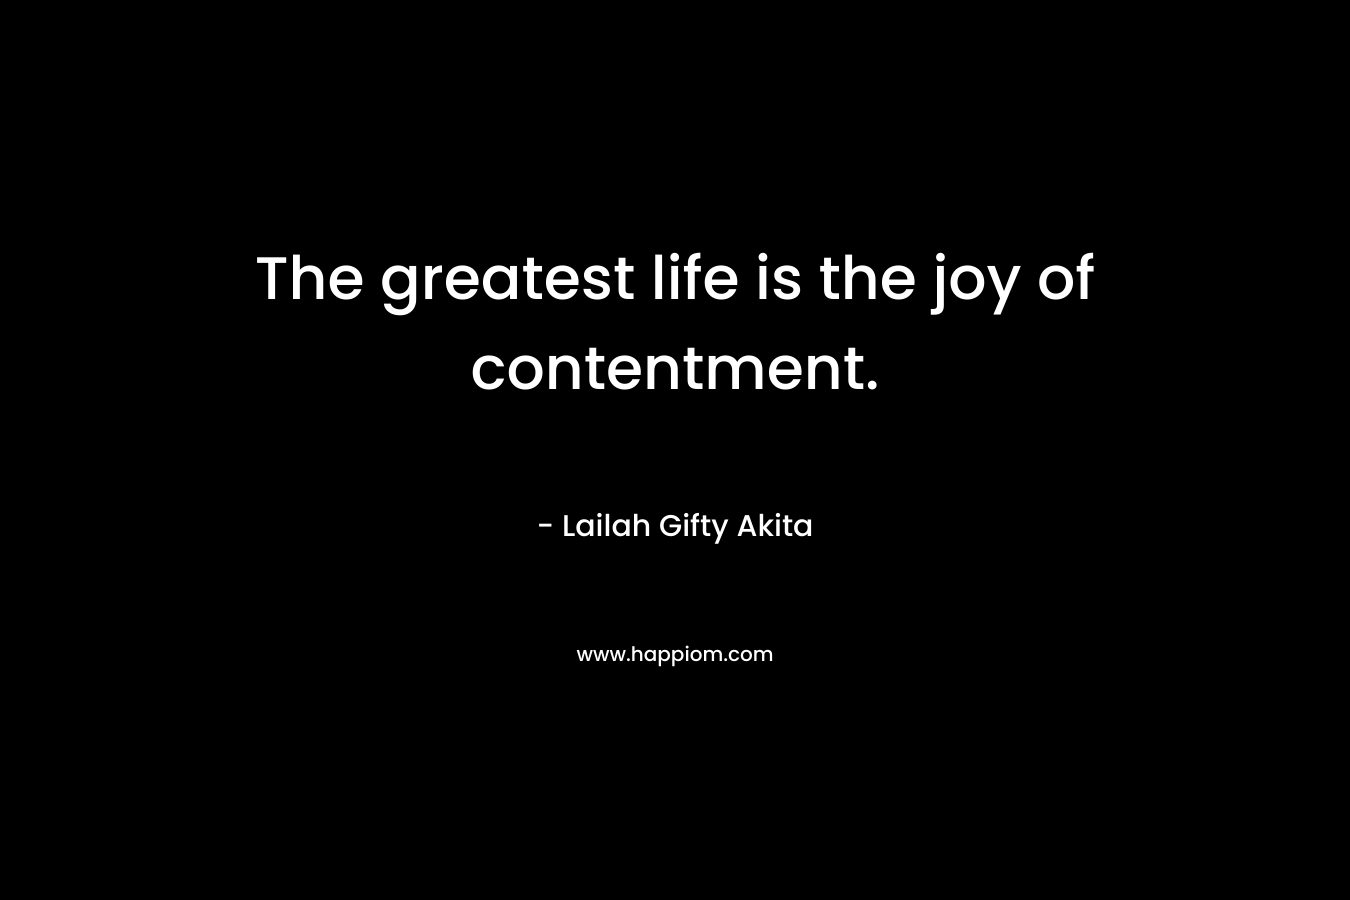 The greatest life is the joy of contentment.